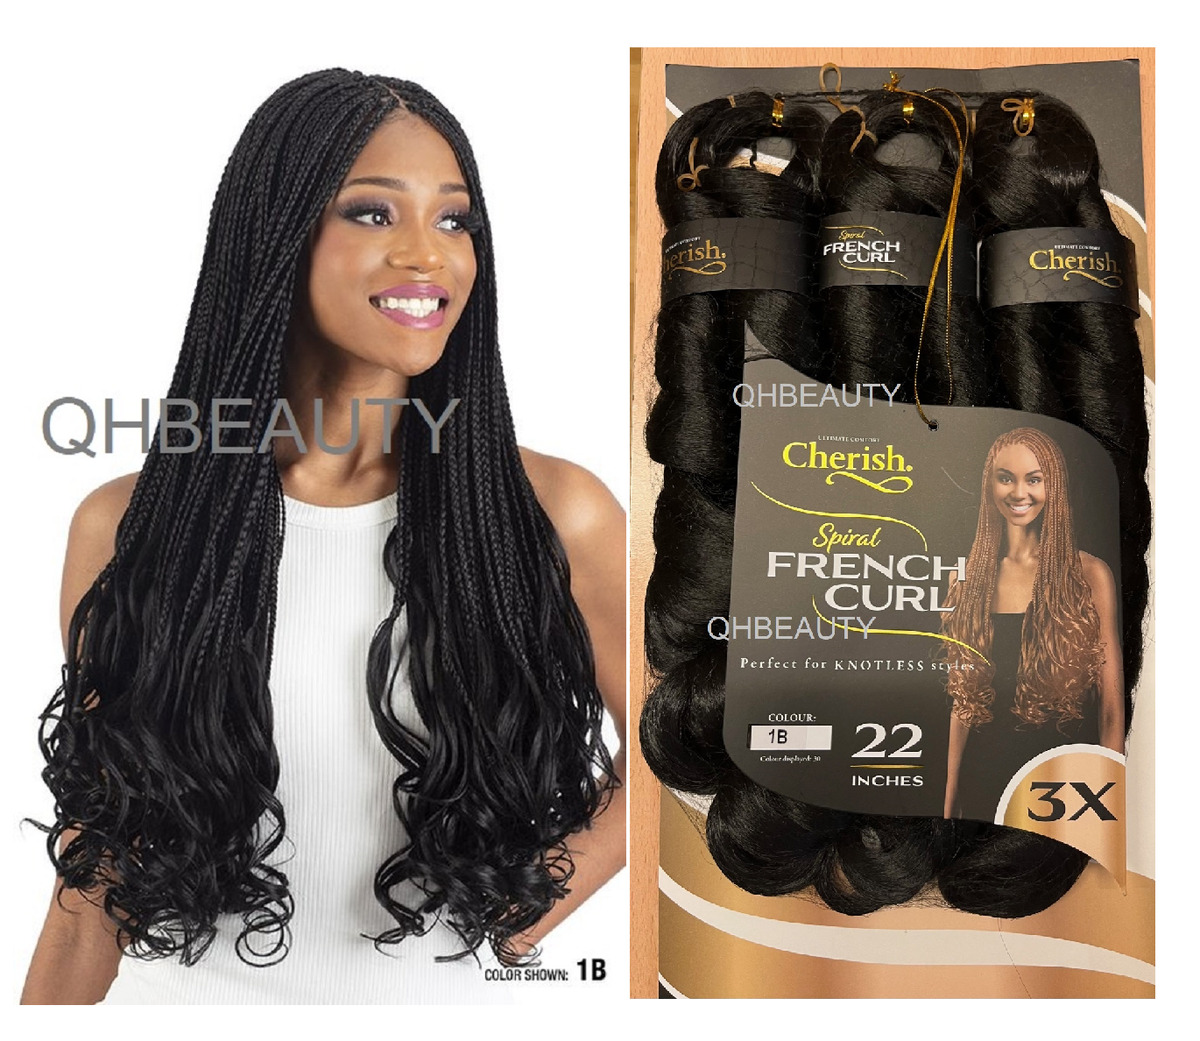 CHERISH SYNTHETIC CURLY SPIRAL HAIR EXTENSION BRAID - 3 x SPIRAL FRENCH  CURL 22